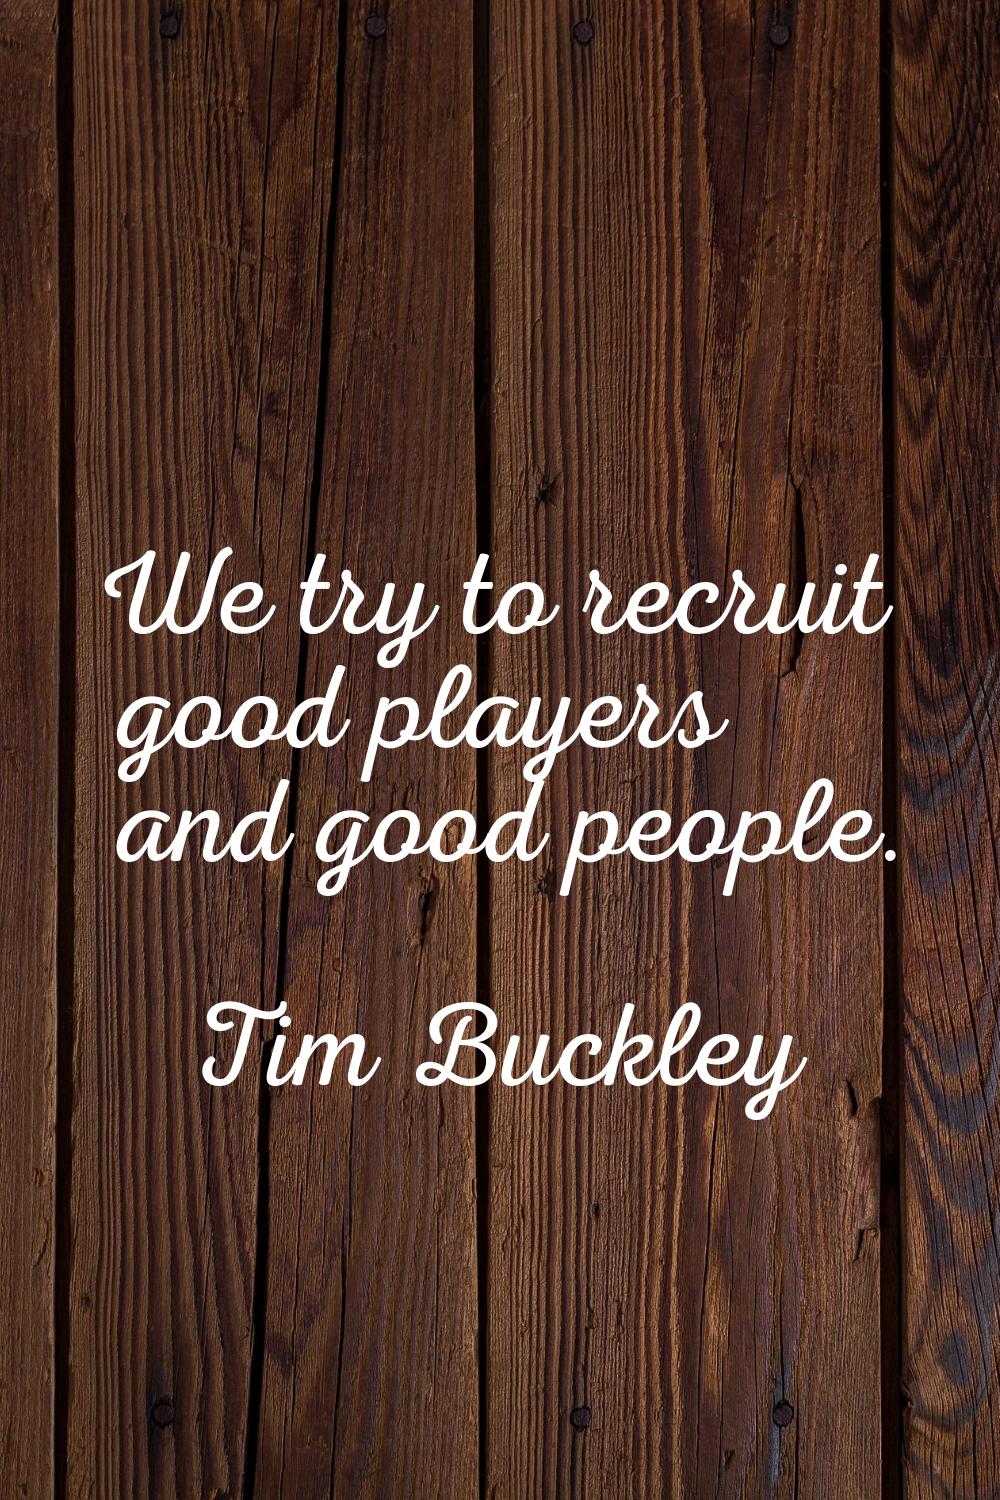 We try to recruit good players and good people.